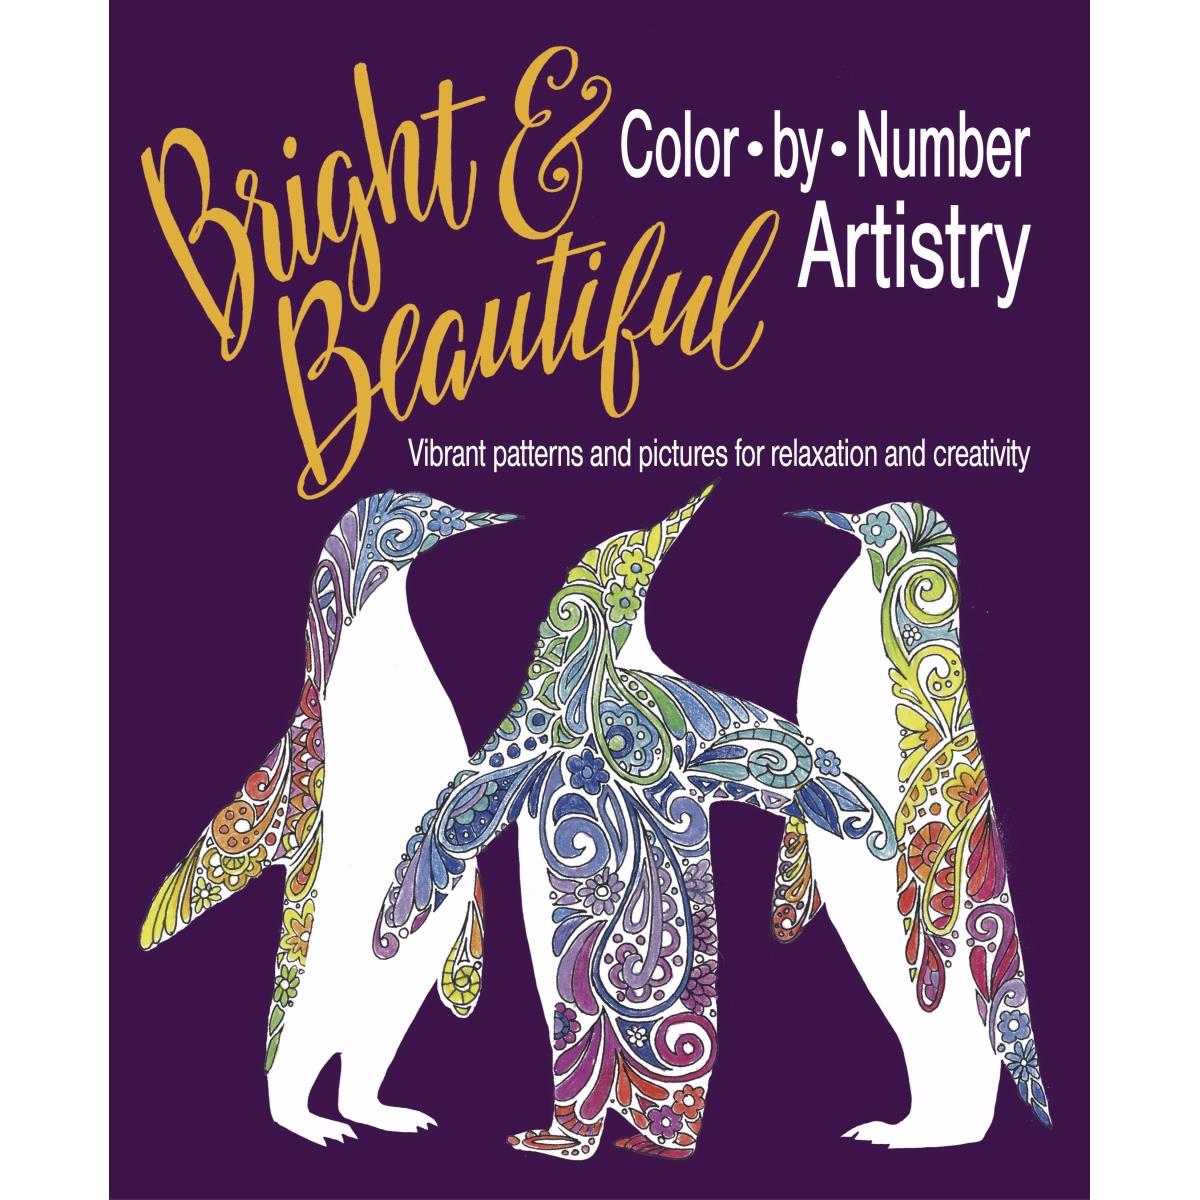 154289 Bright & Beautiful Color By Number Artistry